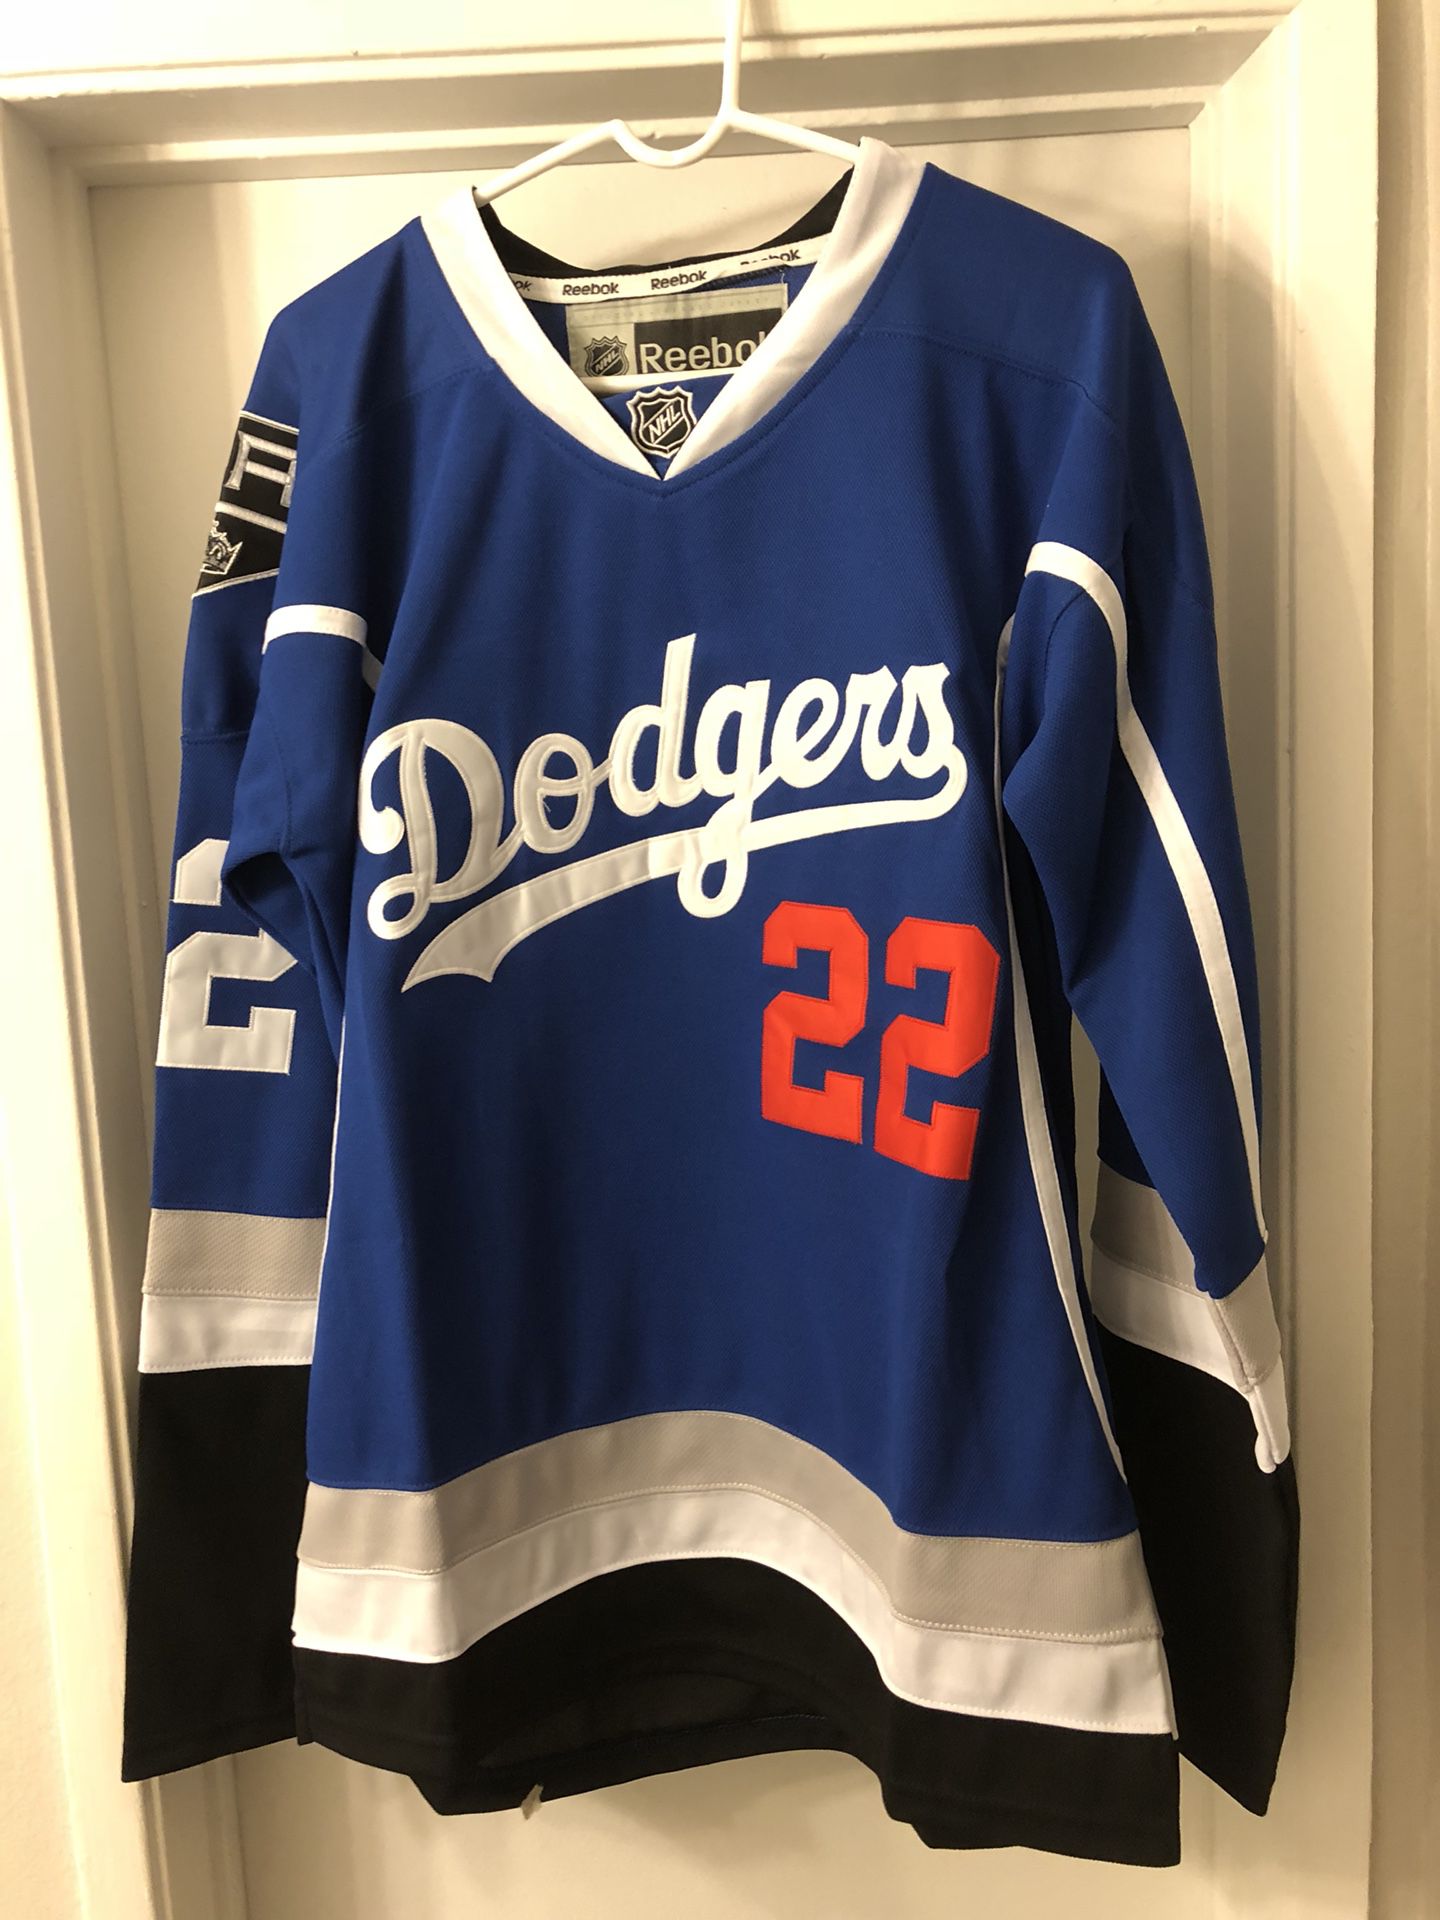 Dodgers Clayton Kershaw Jersey for Sale in Cypress, CA - OfferUp